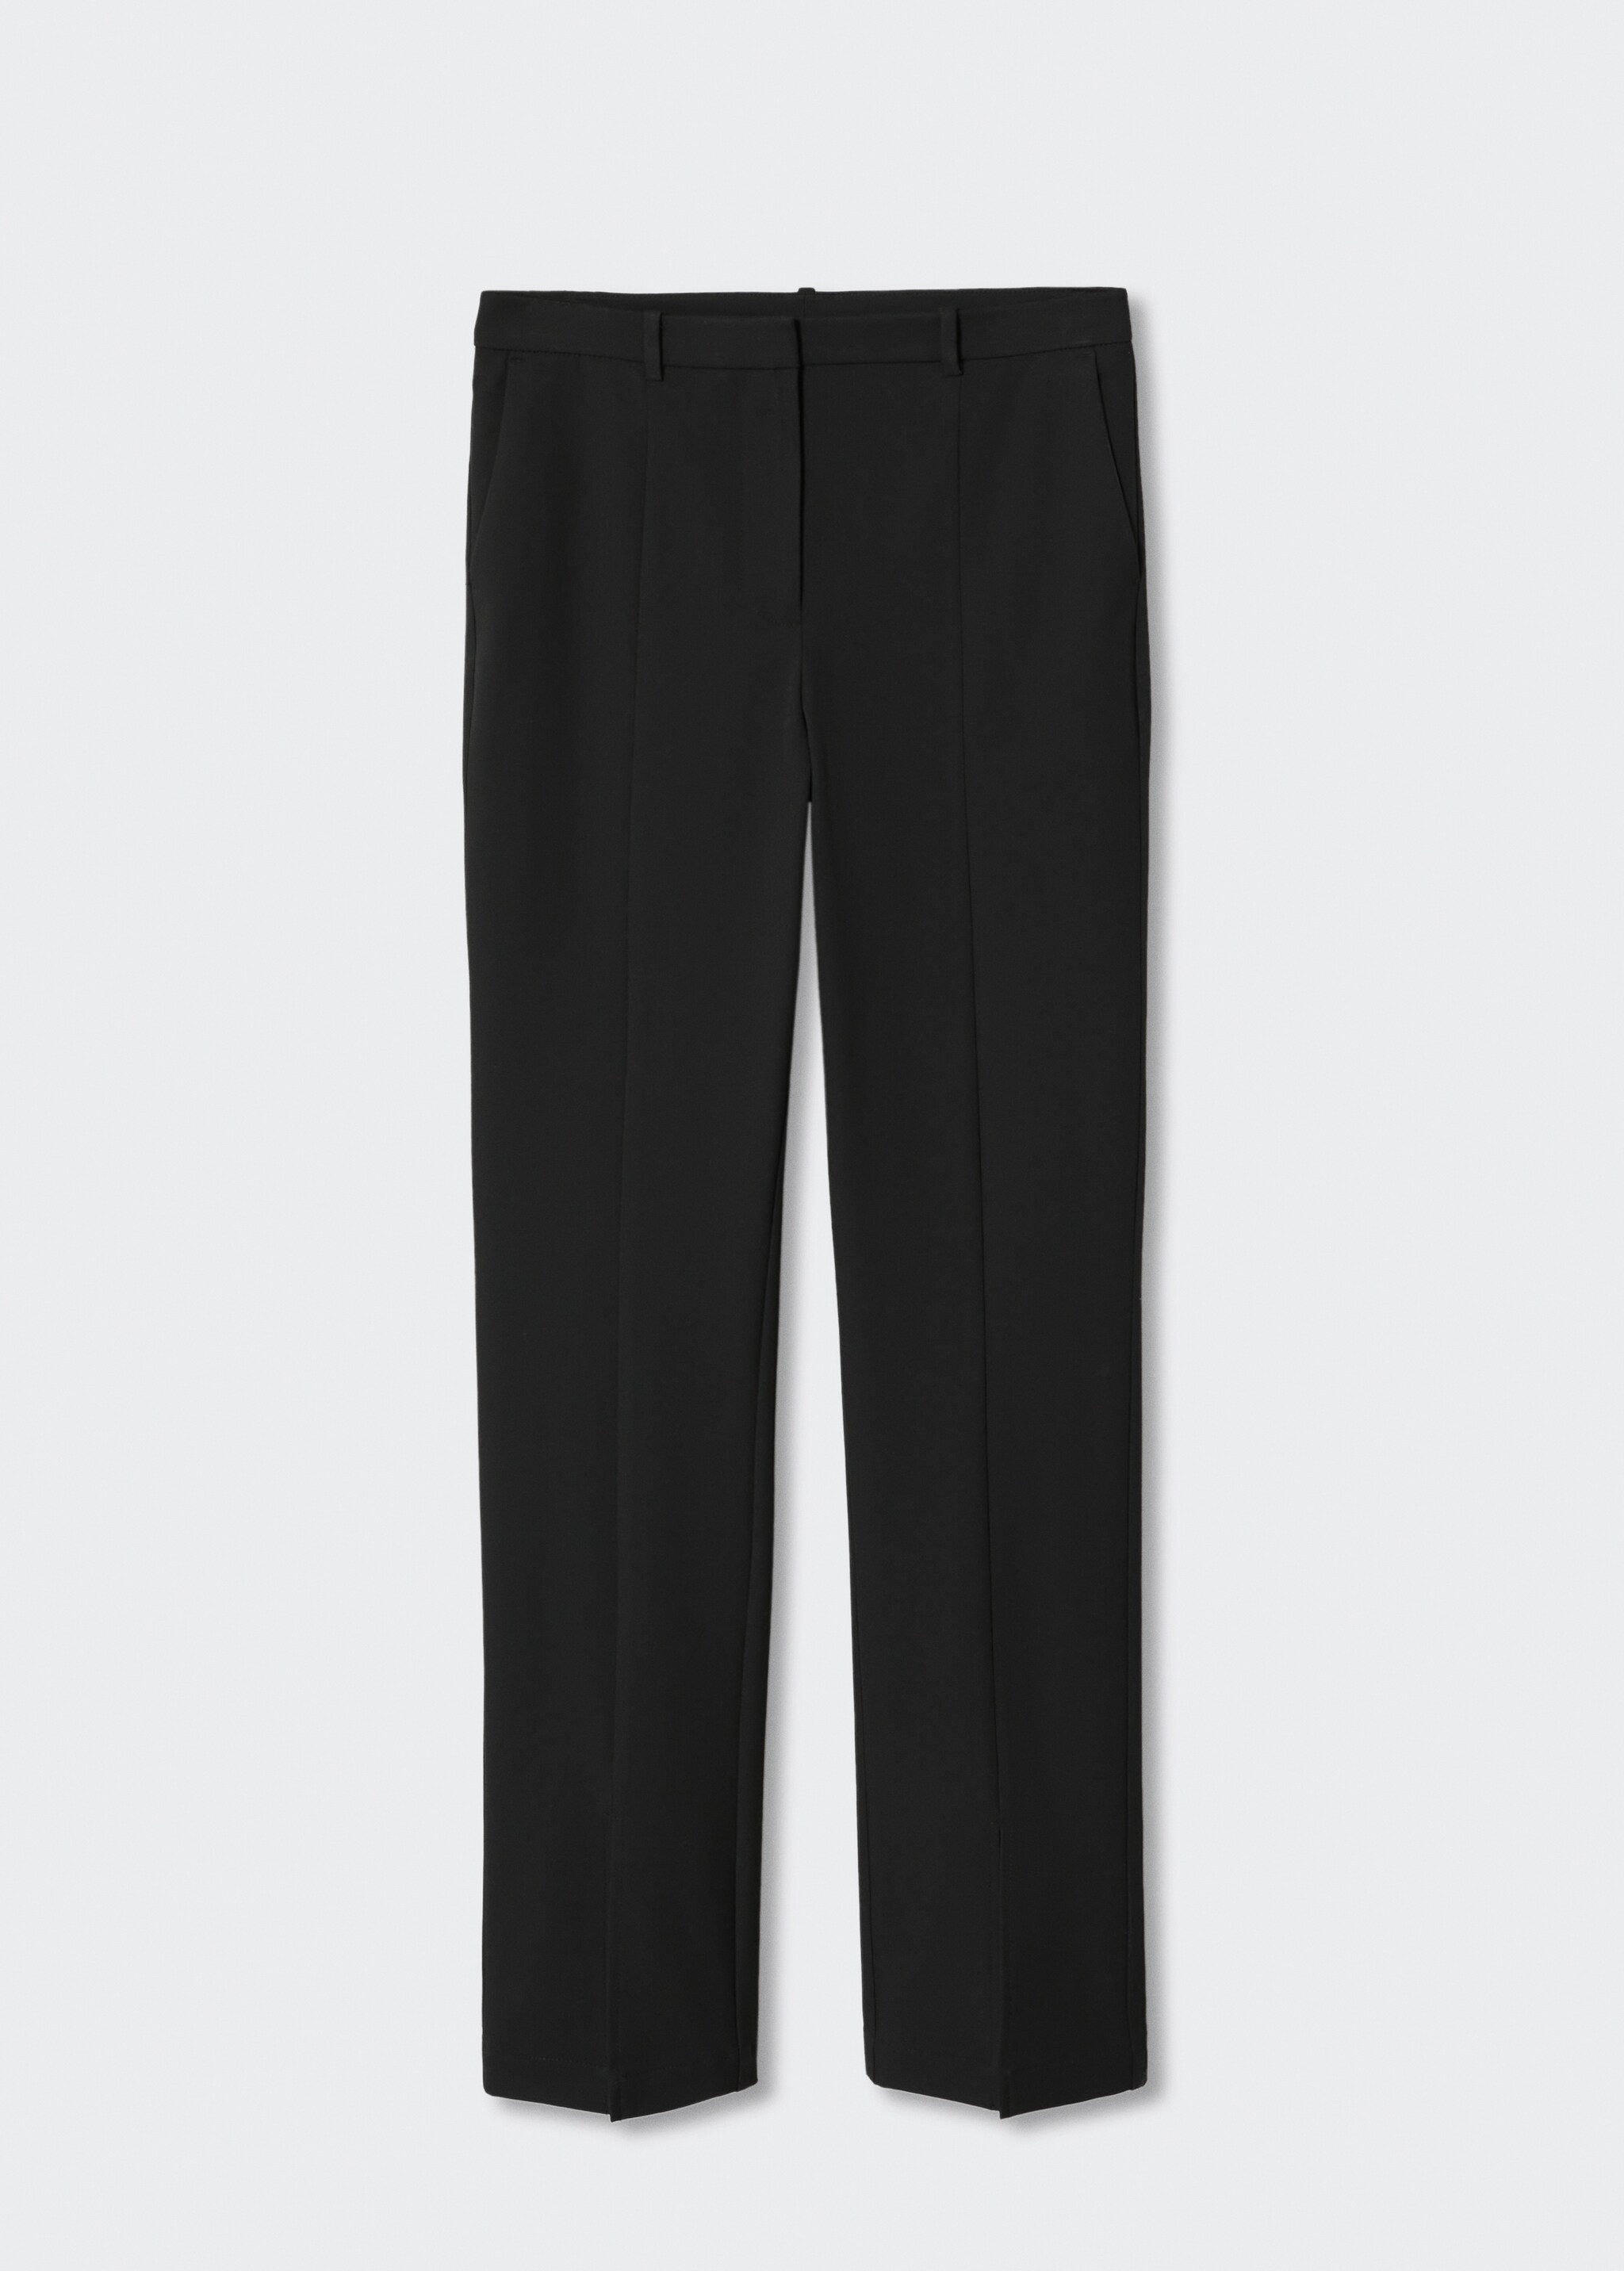 Slit hem trousers - Article without model